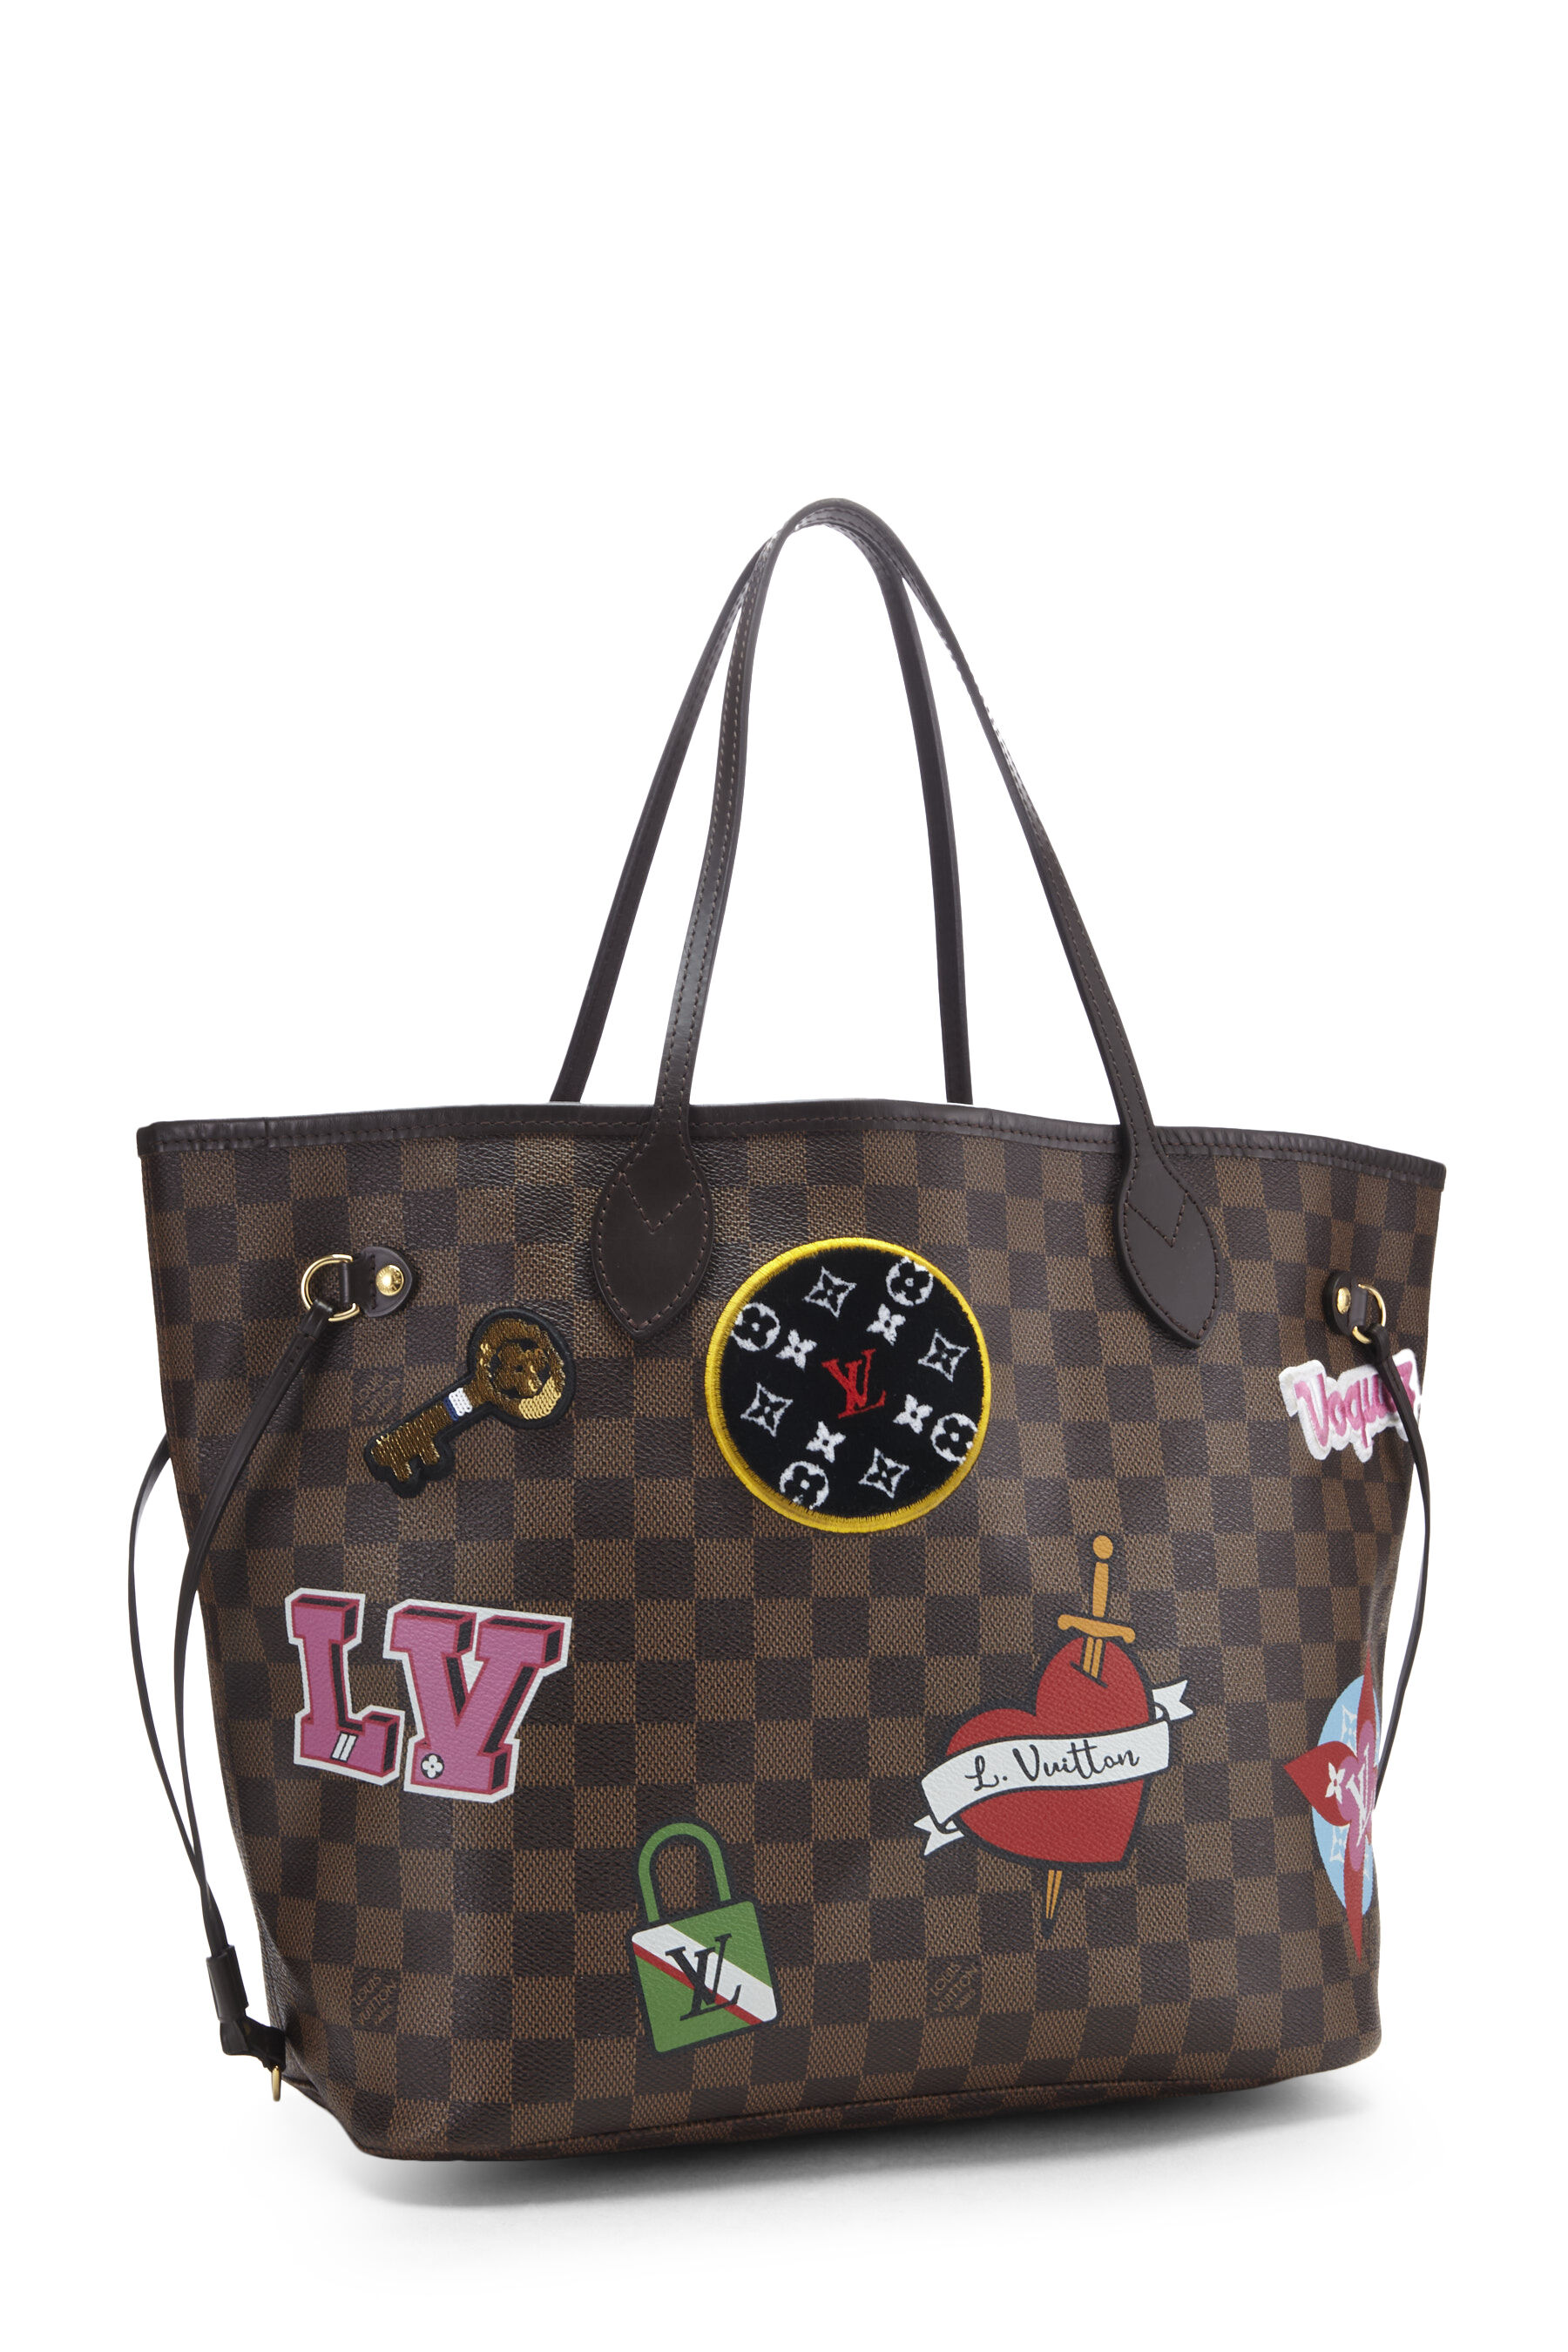 LOUIS VUITTON MONOGRAM CAPSULE HIVER PATCHES NEVERFUL MM BAG LIMITED ED.  NEW!